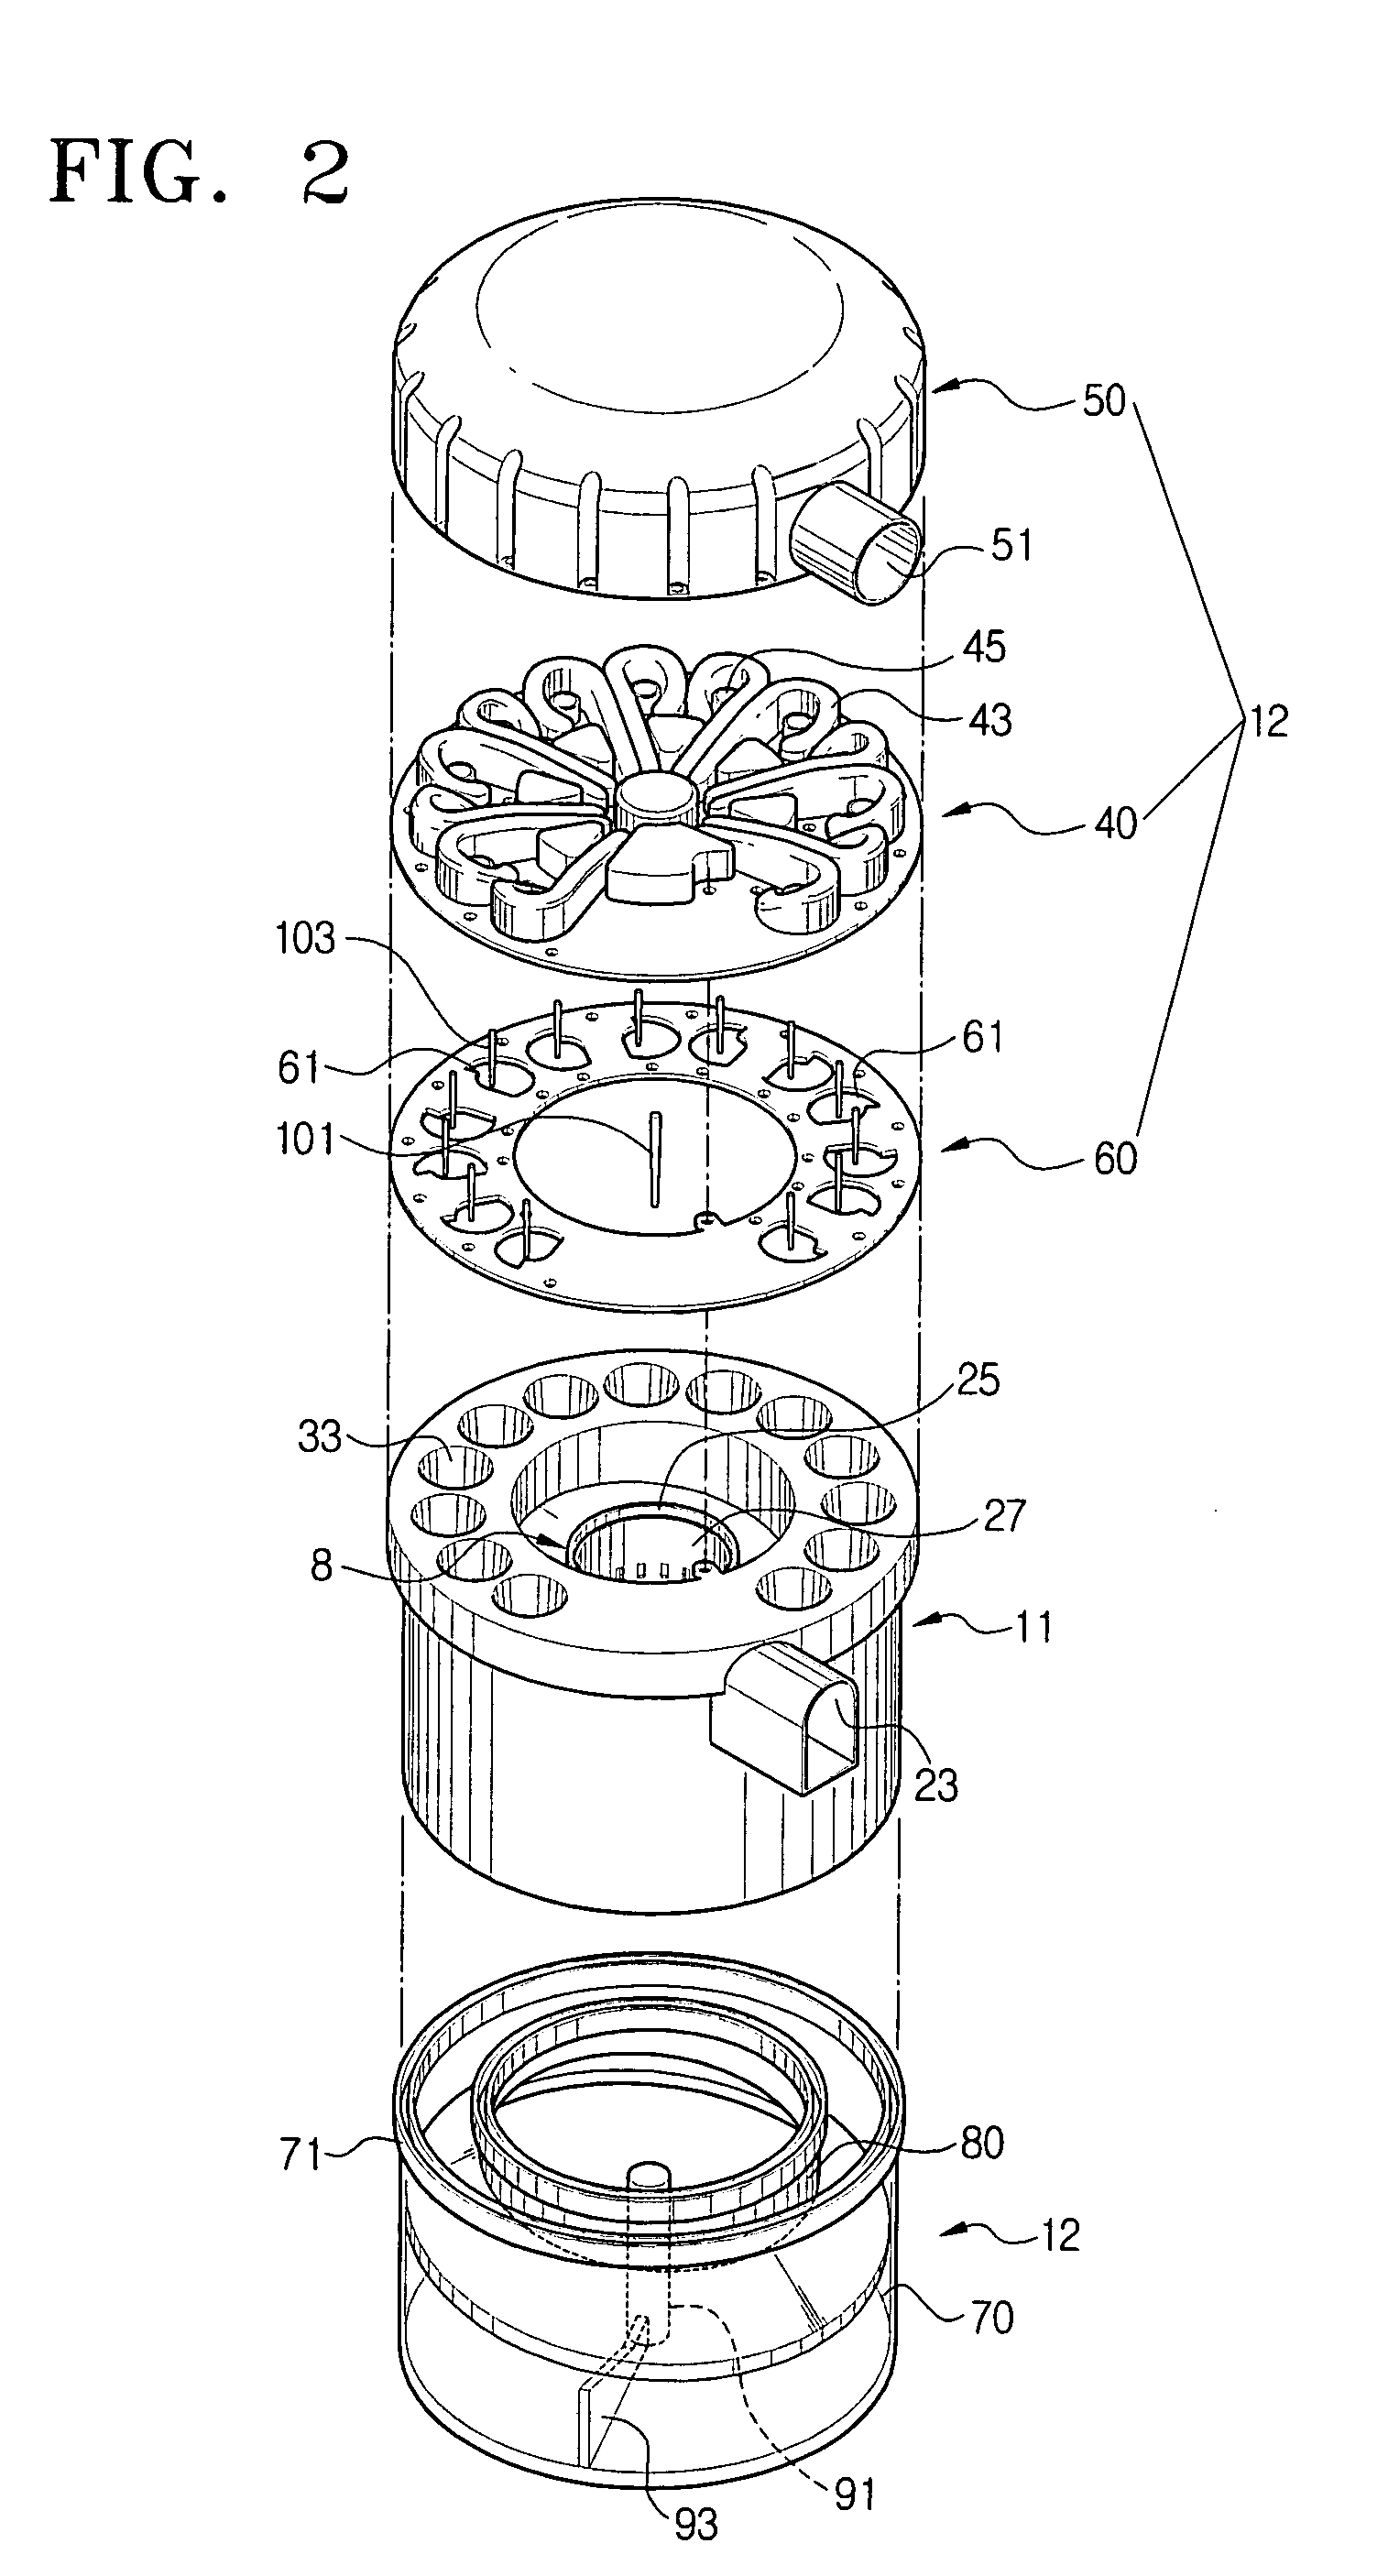 Cyclone dust collecting apparatus